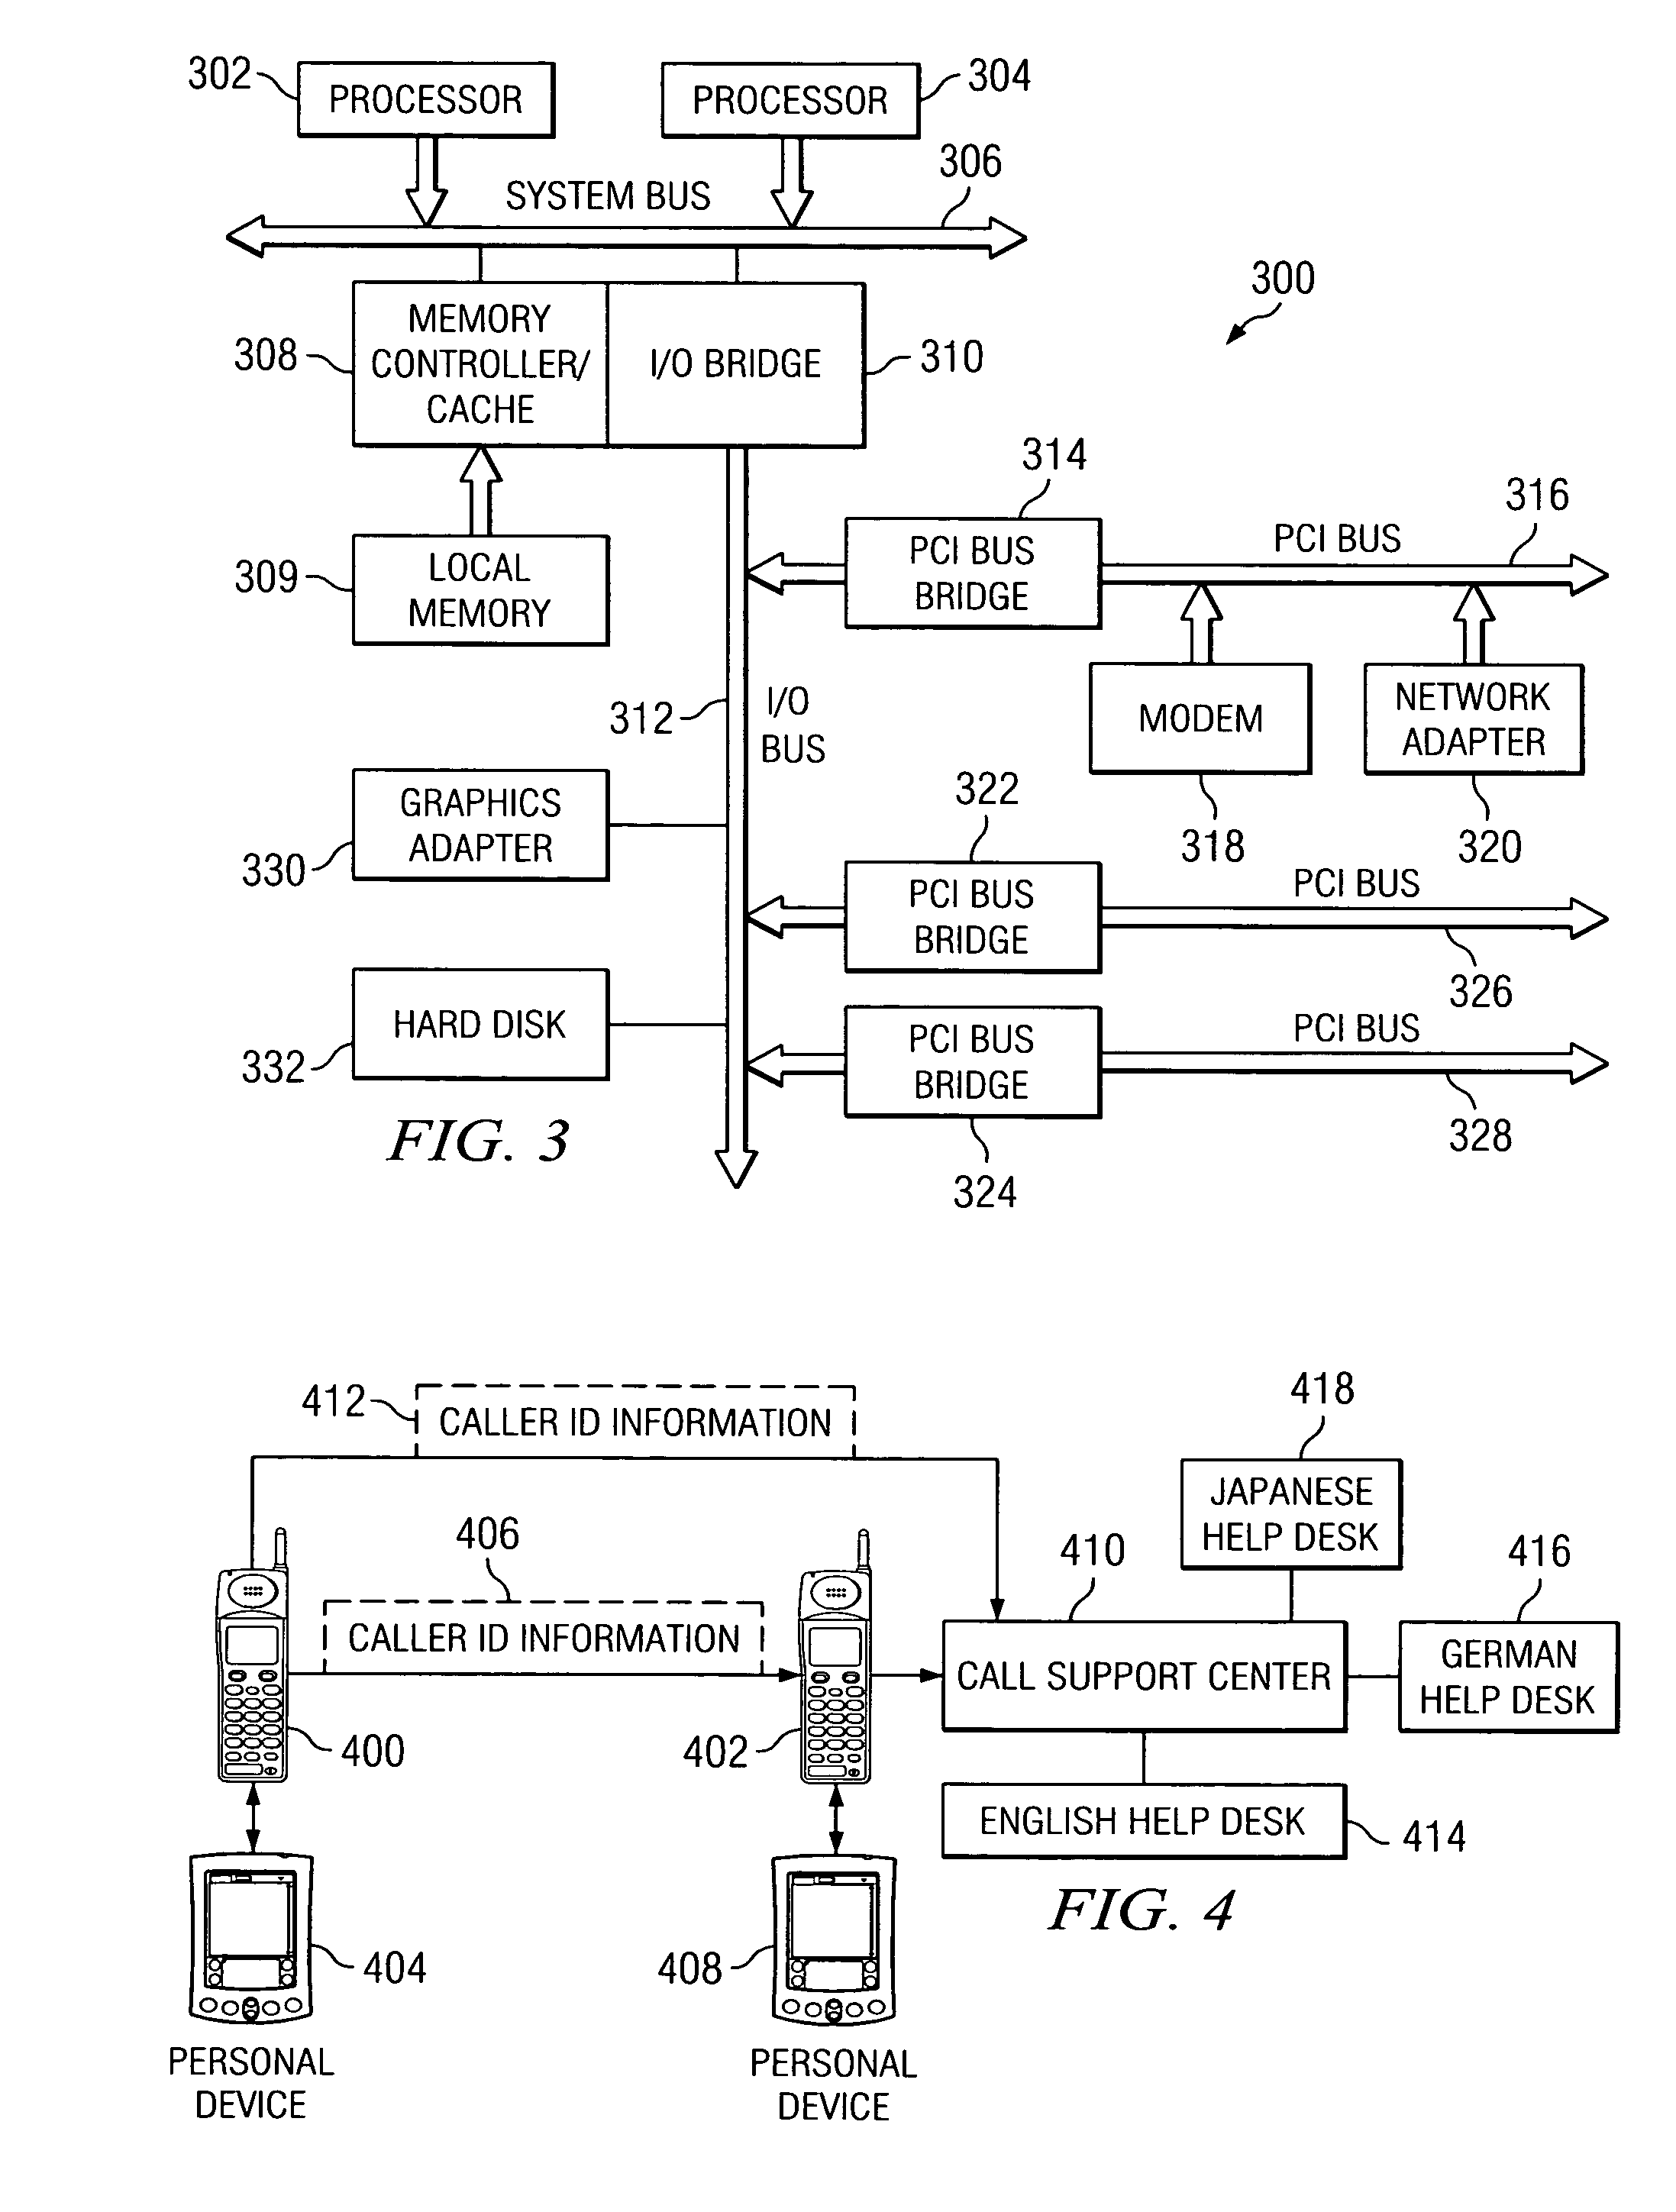 Method and apparatus for presenting caller identification information with geographical and/or source language information